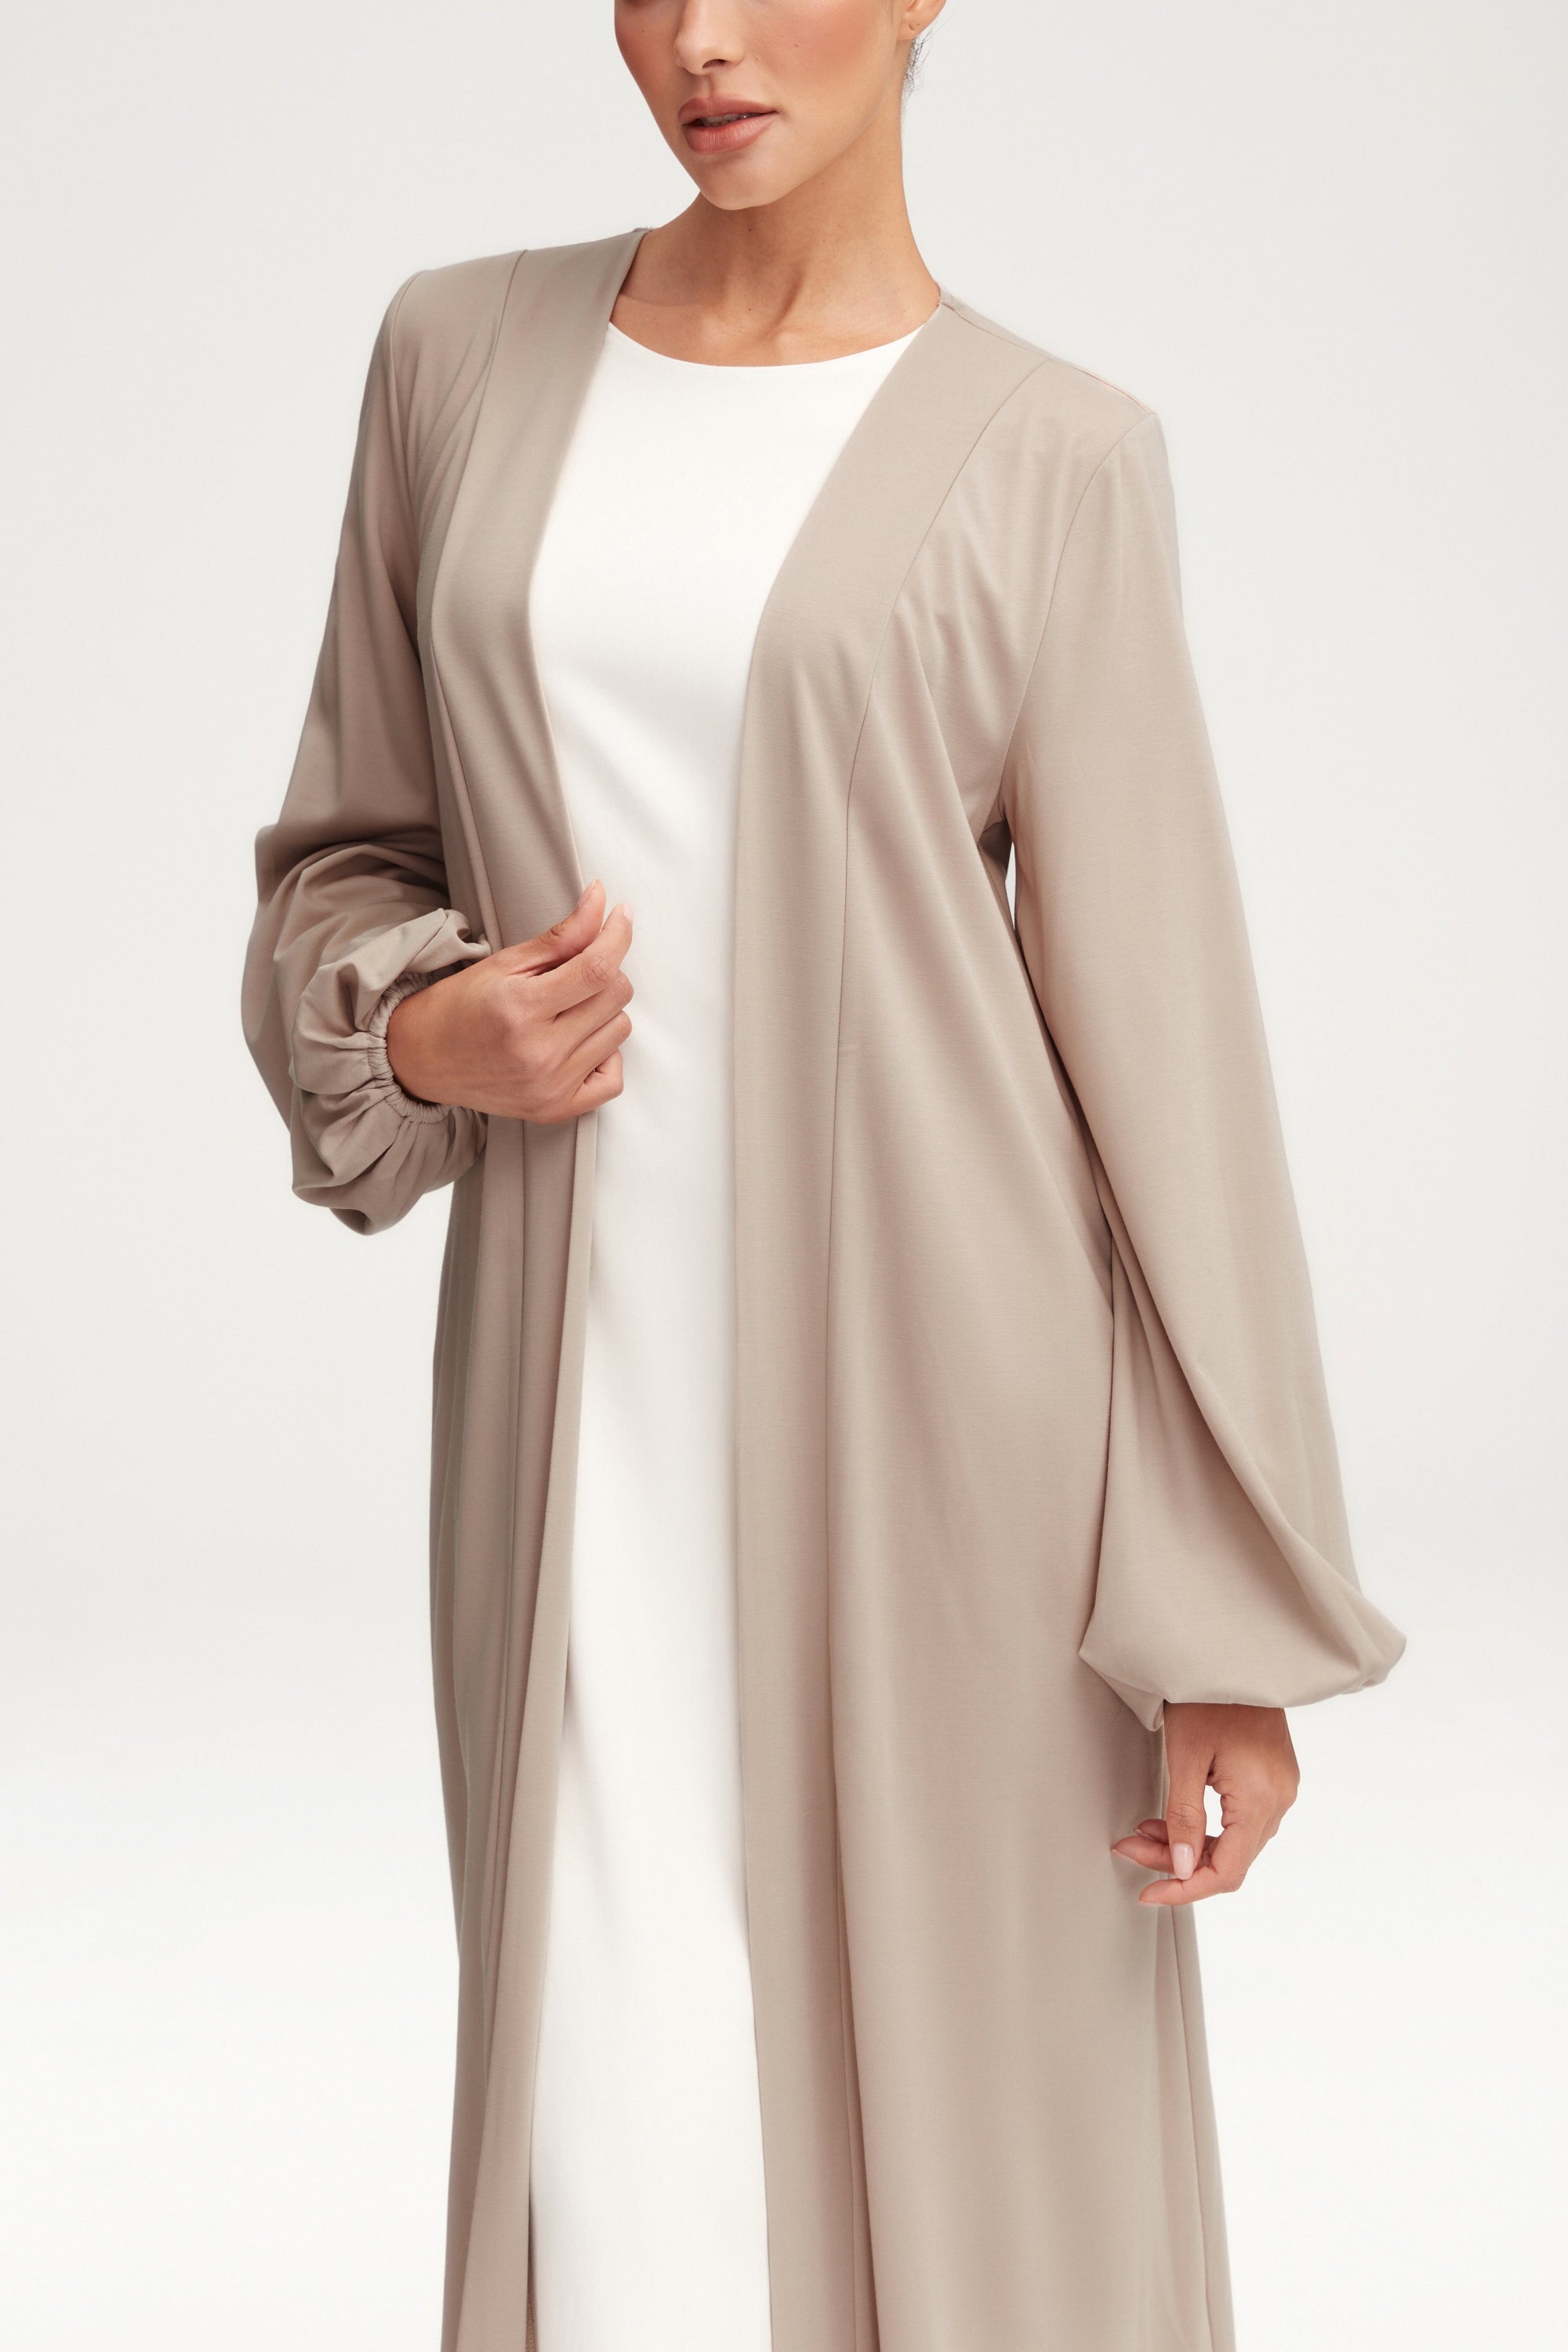 Essential Jersey Open Abaya - Stone Clothing Veiled 